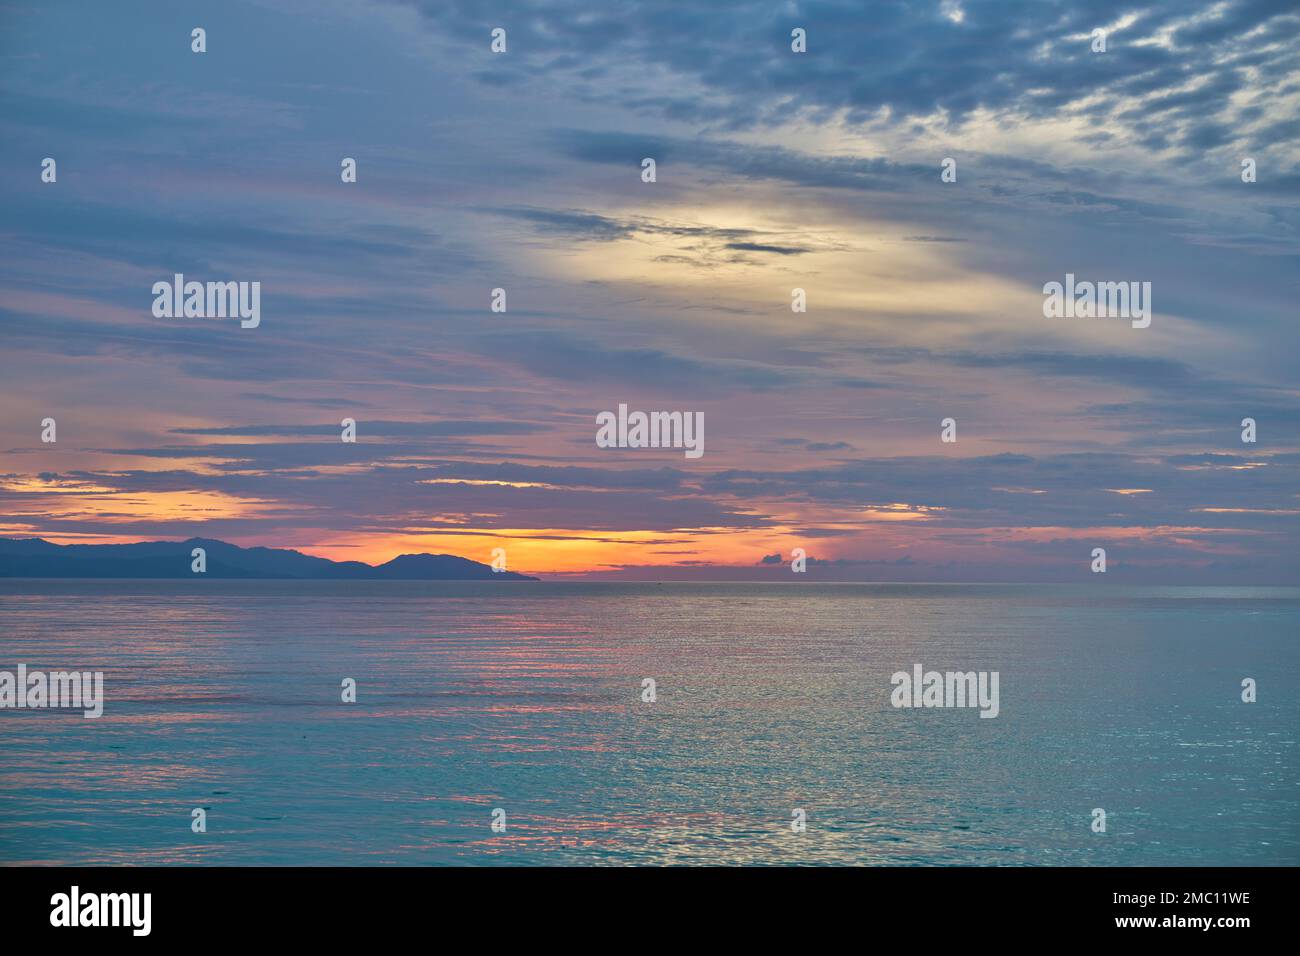 The sun going down over Raja Ampat Islands, Indonesia Stock Photo